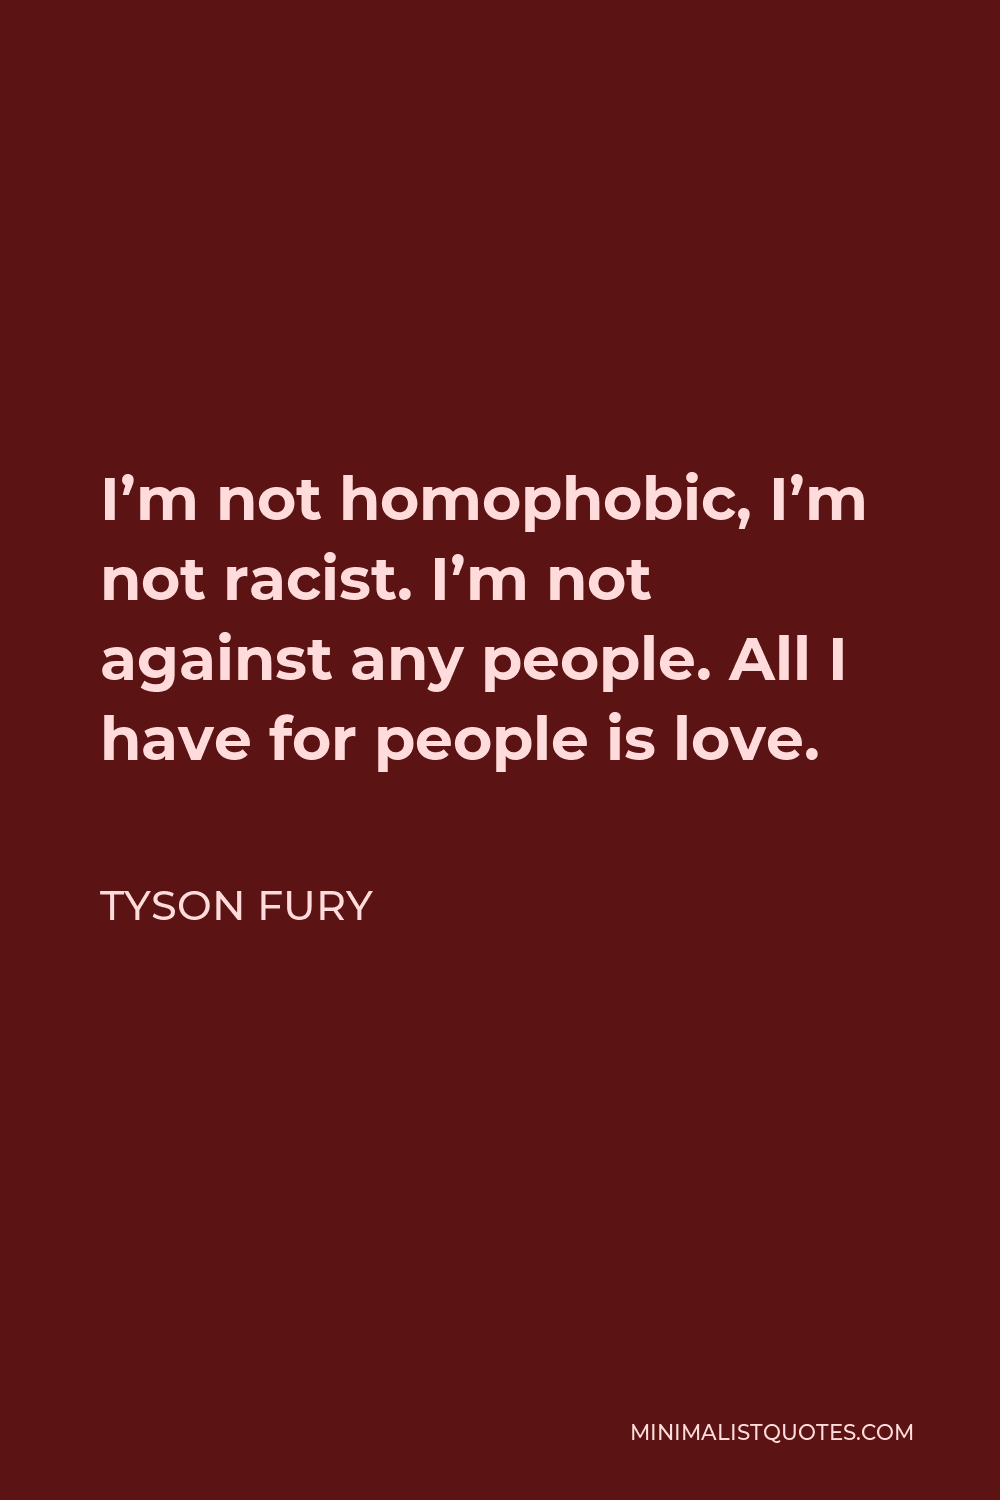 Tyson Fury Quote - I’m not homophobic, I’m not racist. I’m not against any people. All I have for people is love.